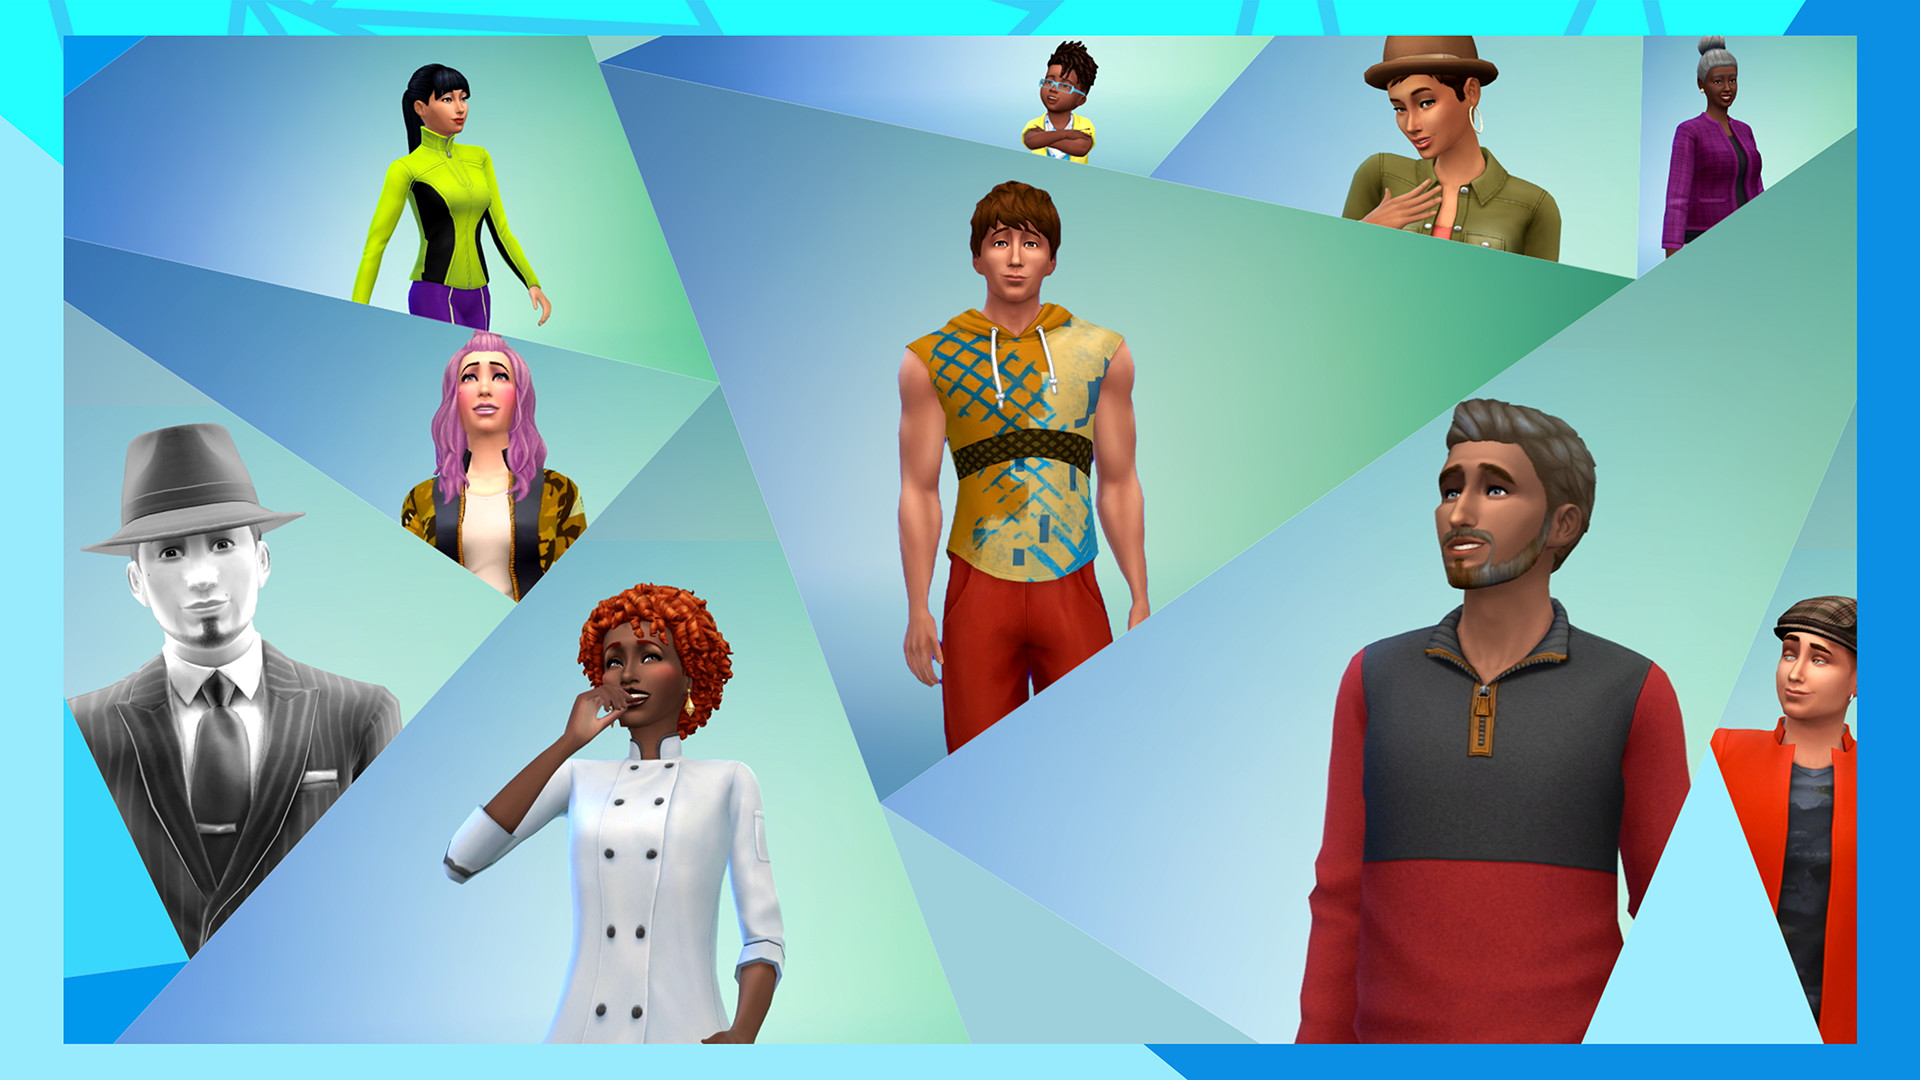 FREE The Sims 4 on Steam and Origin - download and start playing now!